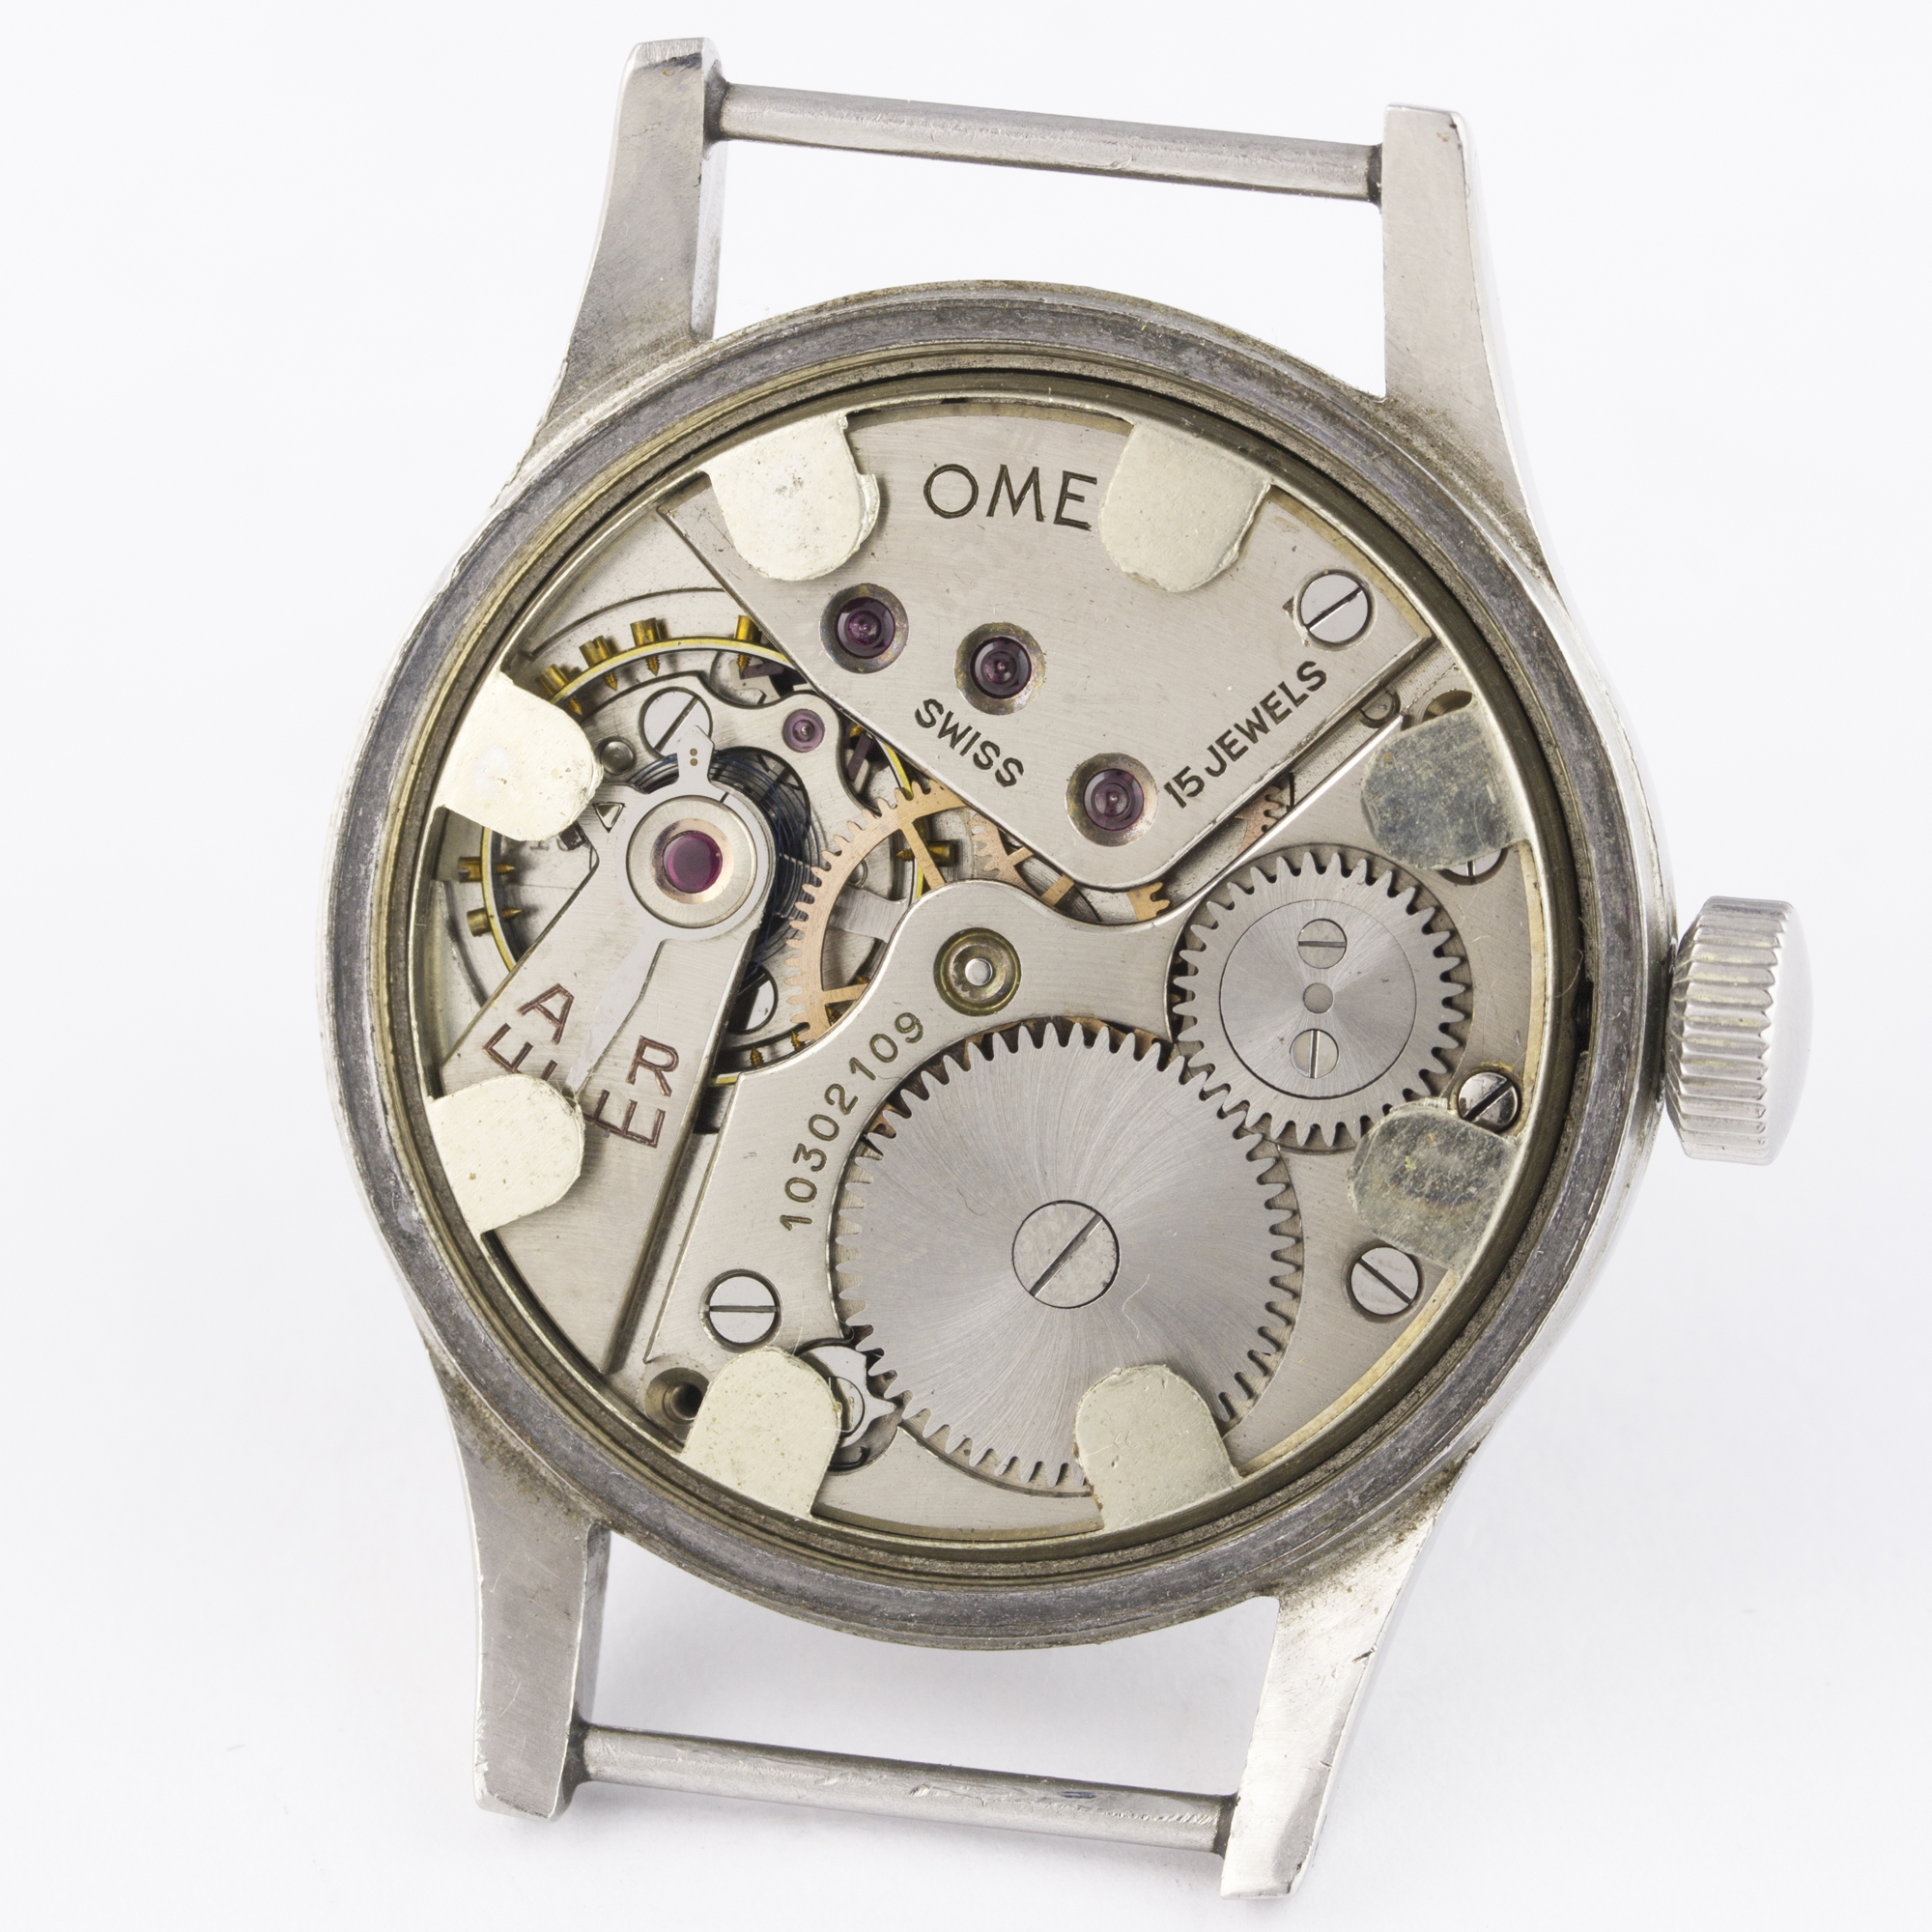 A GENTLEMAN'S STAINLESS STEEL BRITISH MILITARY OMEGA W.W.W. WRIST WATCH CIRCA 1947, PART OF THE " - Image 7 of 8